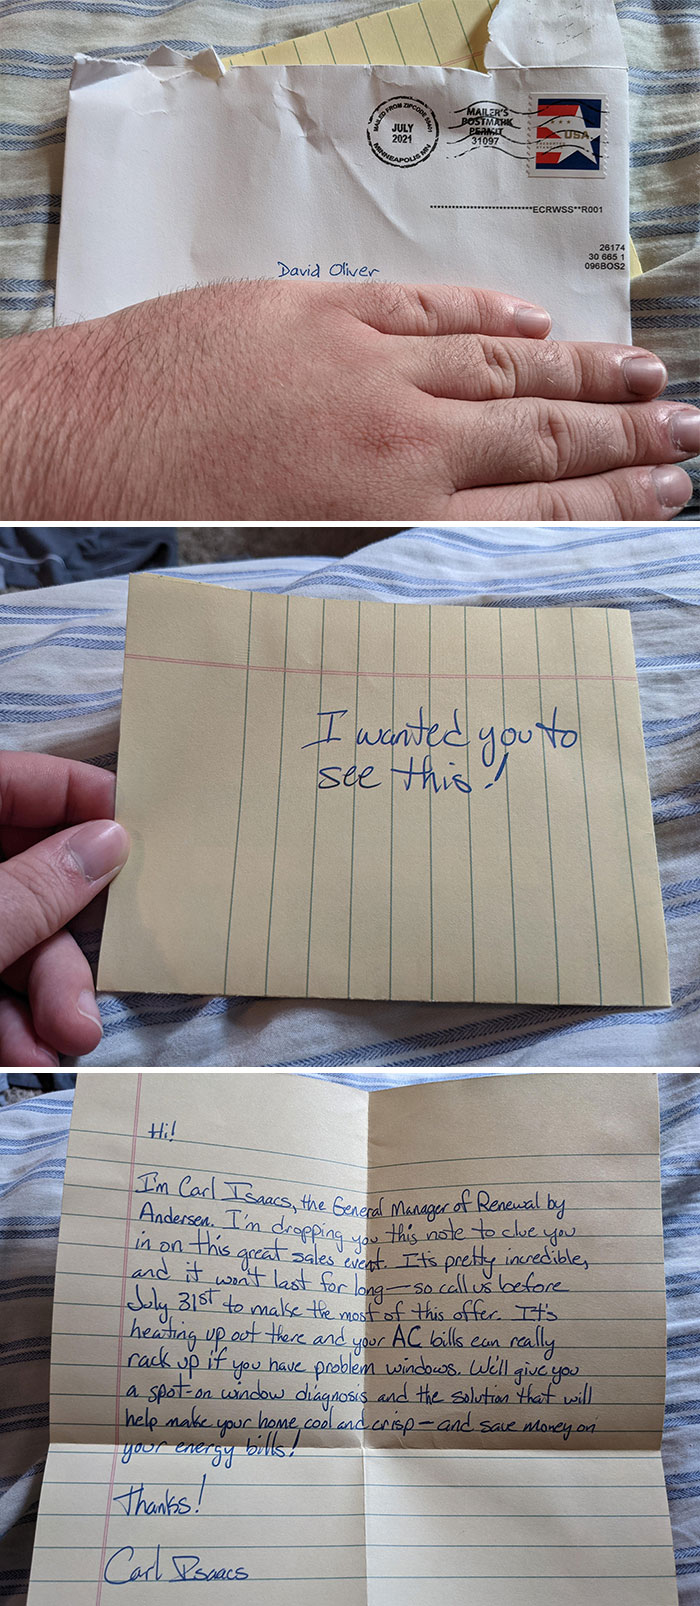 I Just Got Ad In The Mail Disguised As A Hand-Written Letter. Address Is Covered So I Don't Doxx Myself